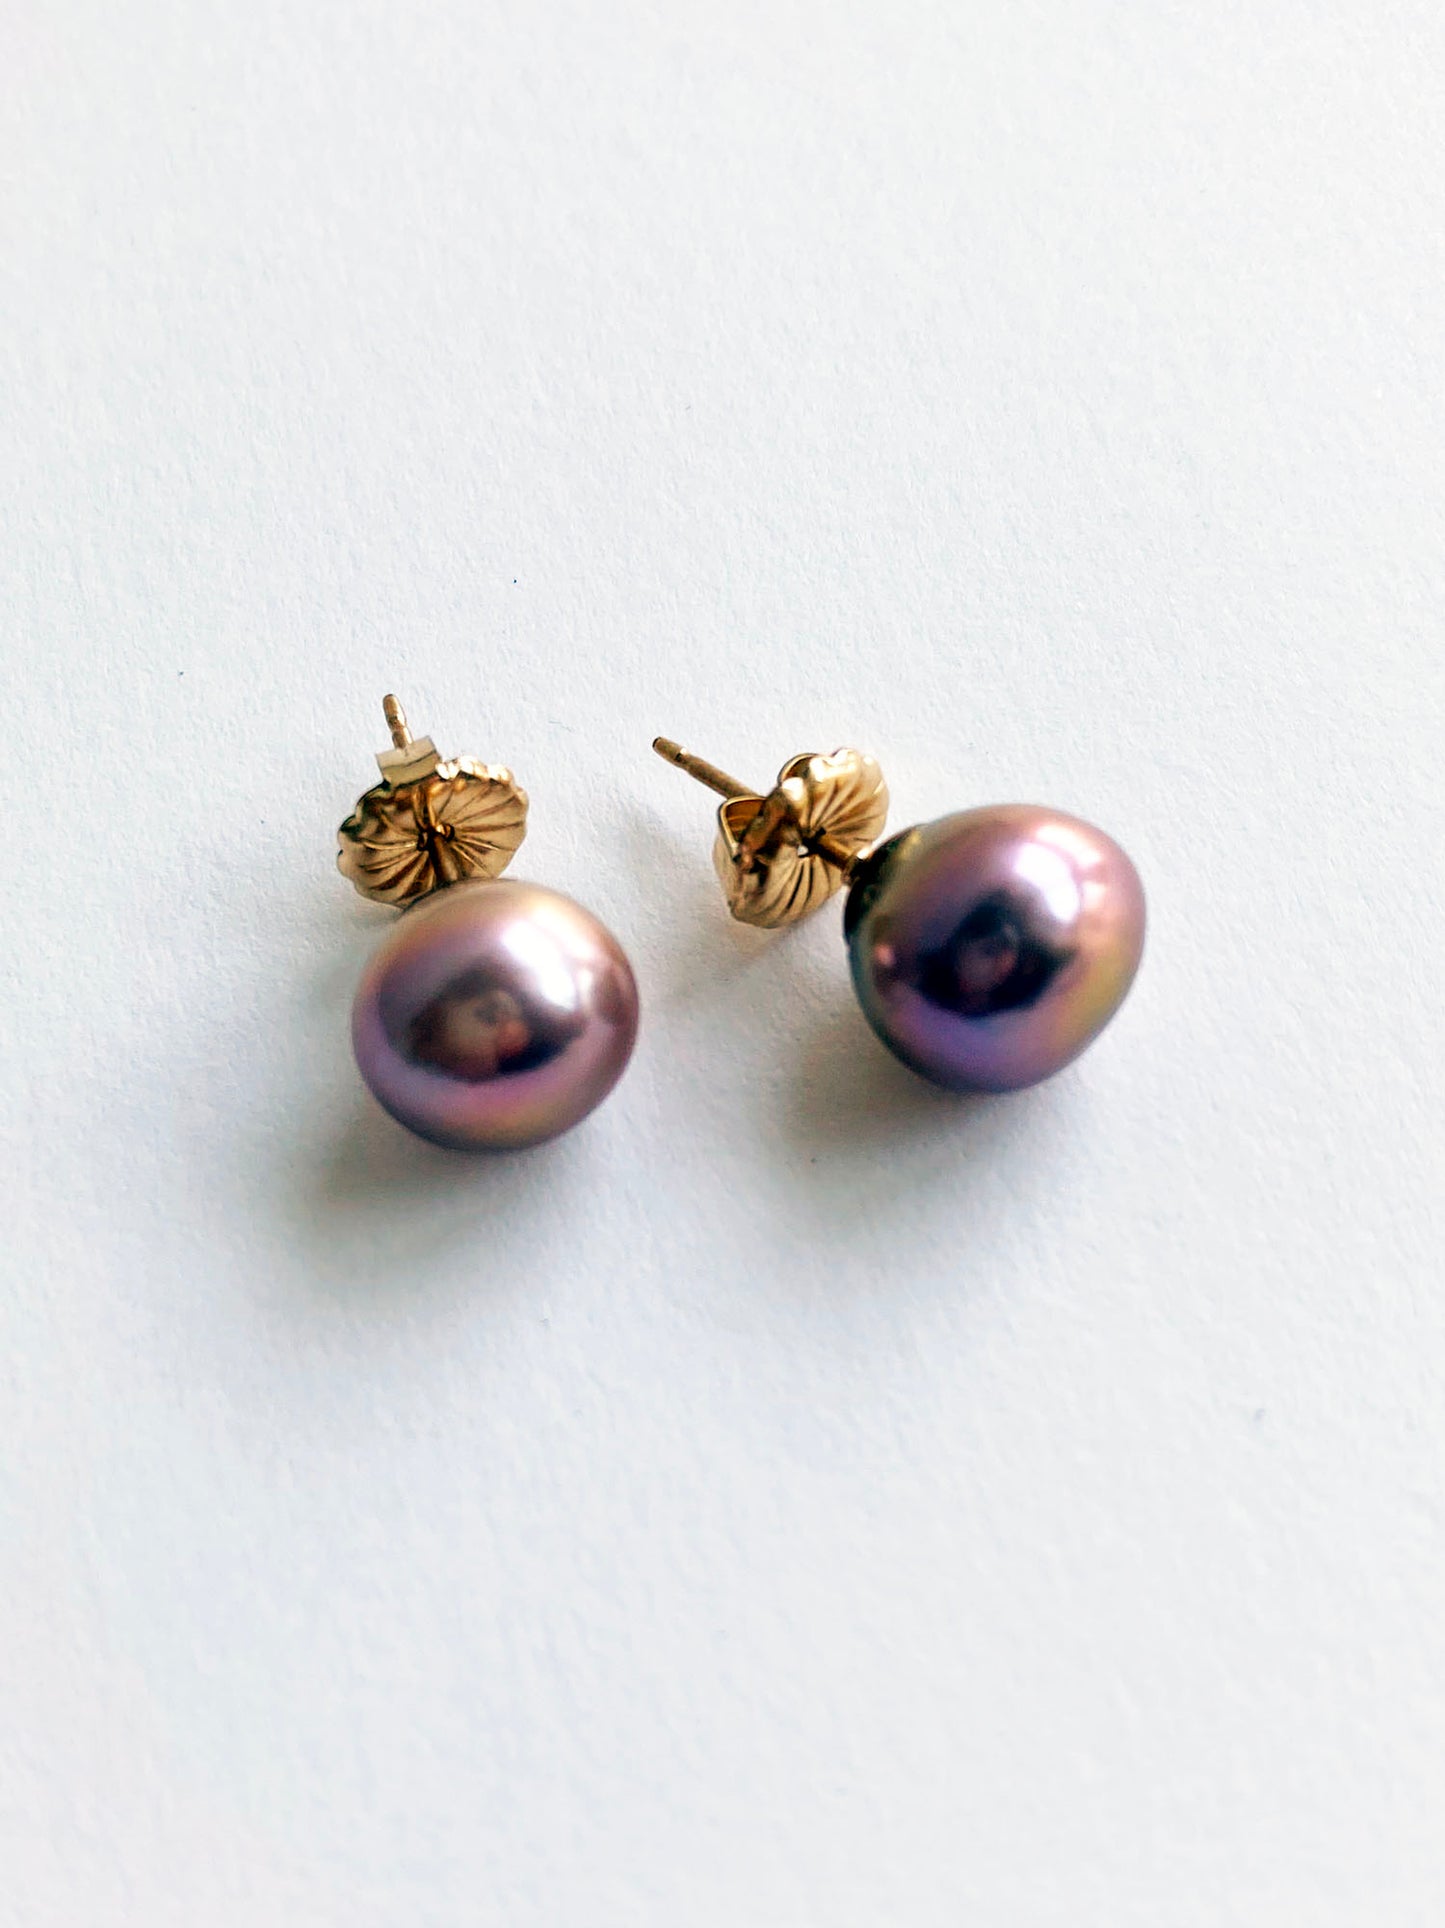 9mm Freshwater Lavender Rose Edison Pearls on 14k GF Posts by Linda Queally